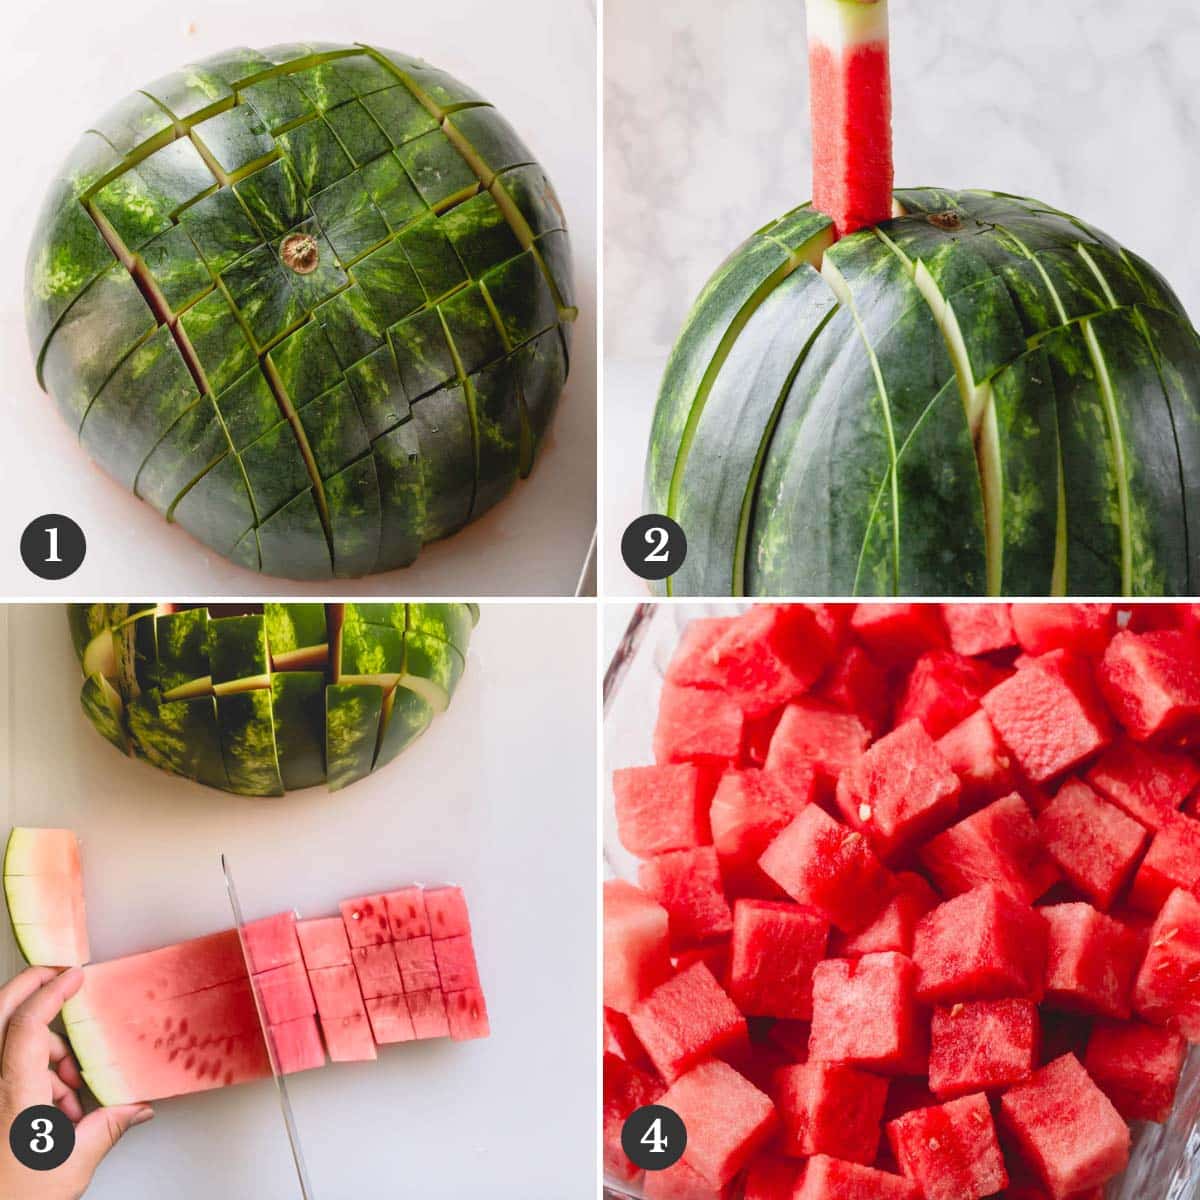 Step by step photos of cutting a watermelon into cubes.